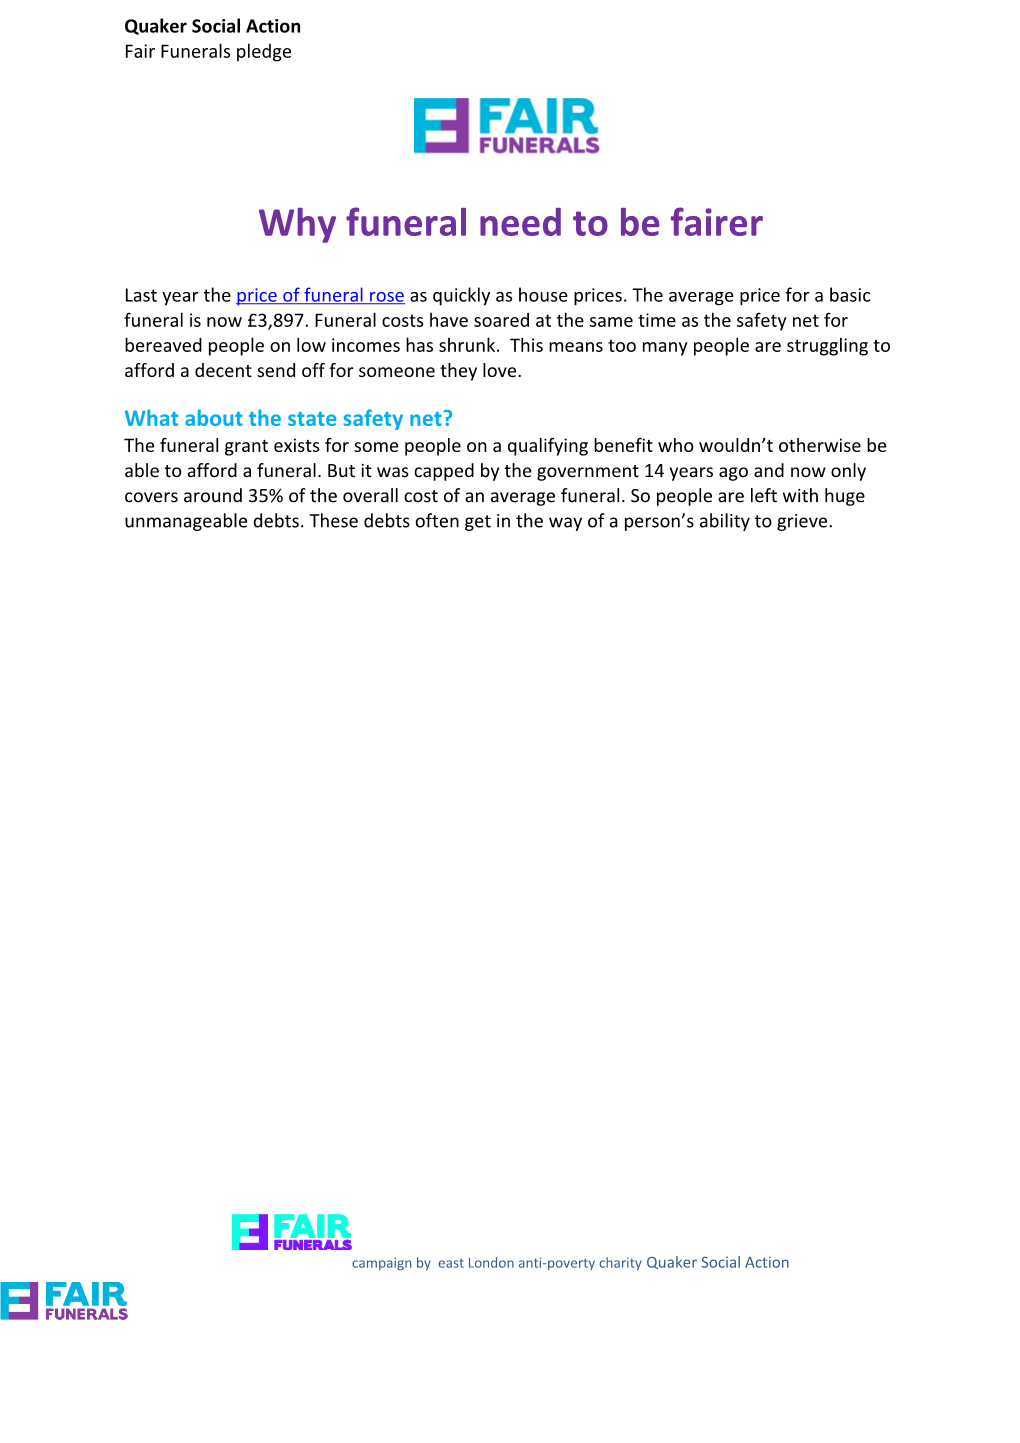 FAIR Funeral Pledge CAMPAIGNING Pack